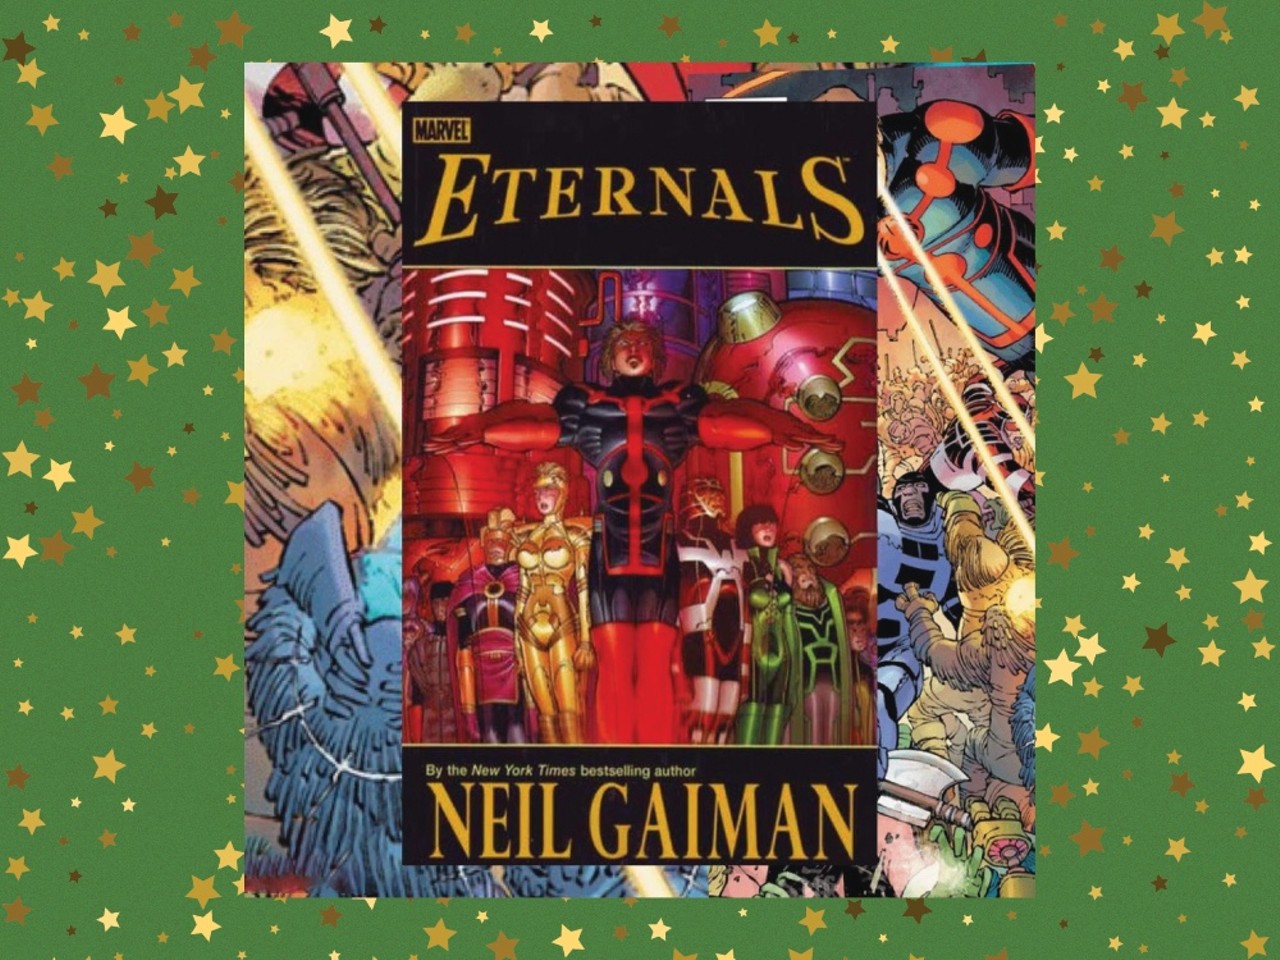 Marvel Eternals Comic Book from Apotheosis Comics and Lounge: $24.99
(3359 South Jefferson Avenue, Apotheosis Comics and Lounge) 
Before there was Marvel's Eternals the movie, there were the comic books by sci-fi writer Neil Gaiman. Dive deeper into the Marvel universe and kick back with a comic and beer from Apotheosis. 
Photo credit: Apotheosis Comics